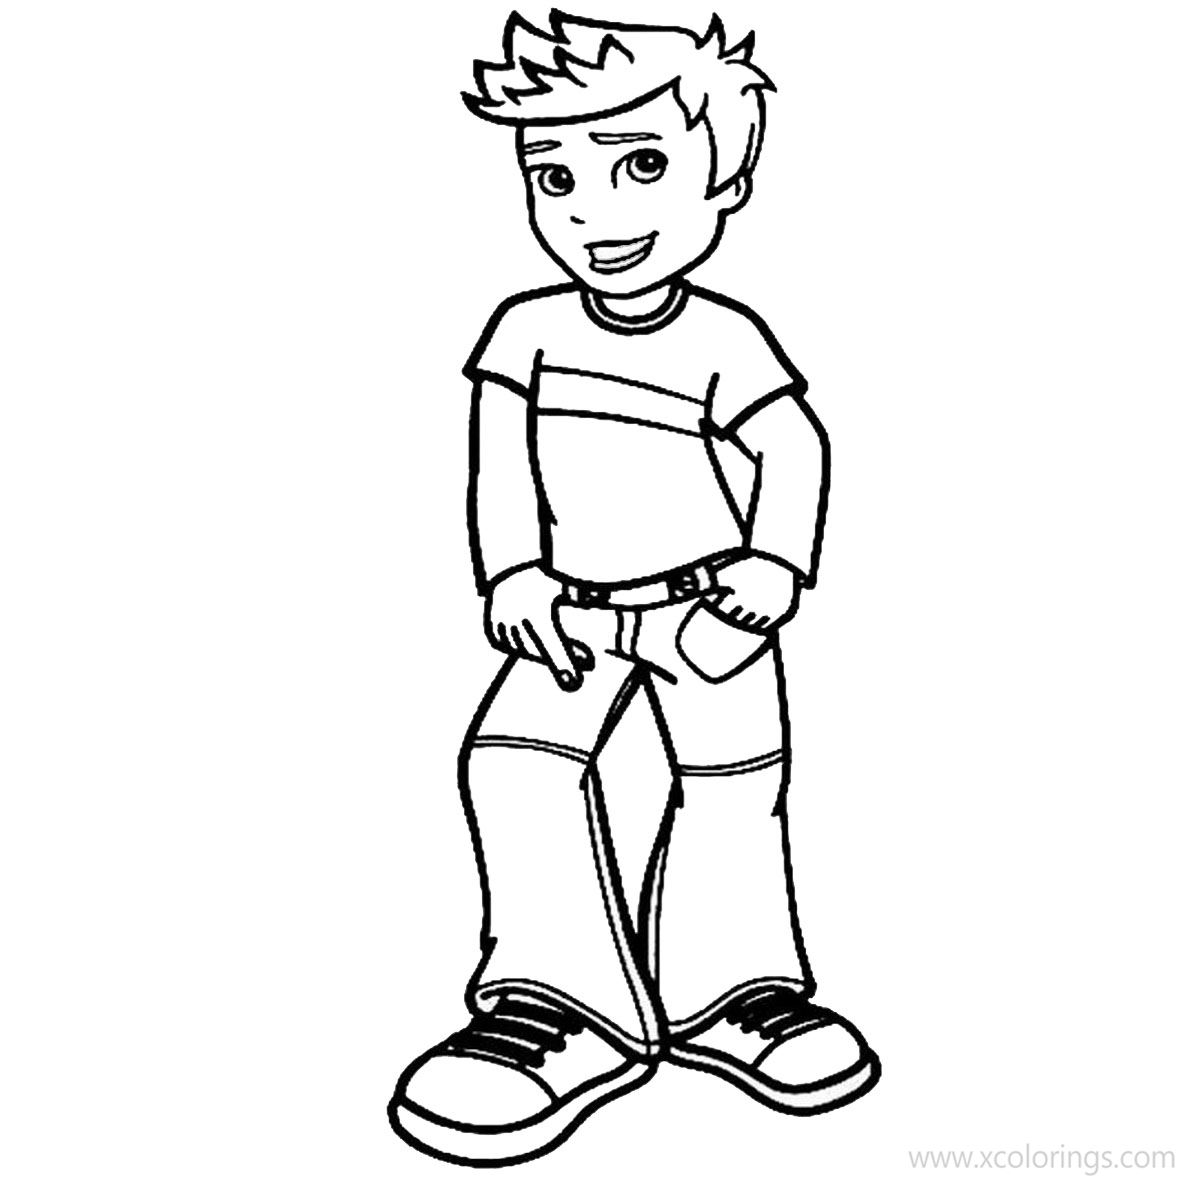 Free Polly Pocket Rick Coloring Pages printable